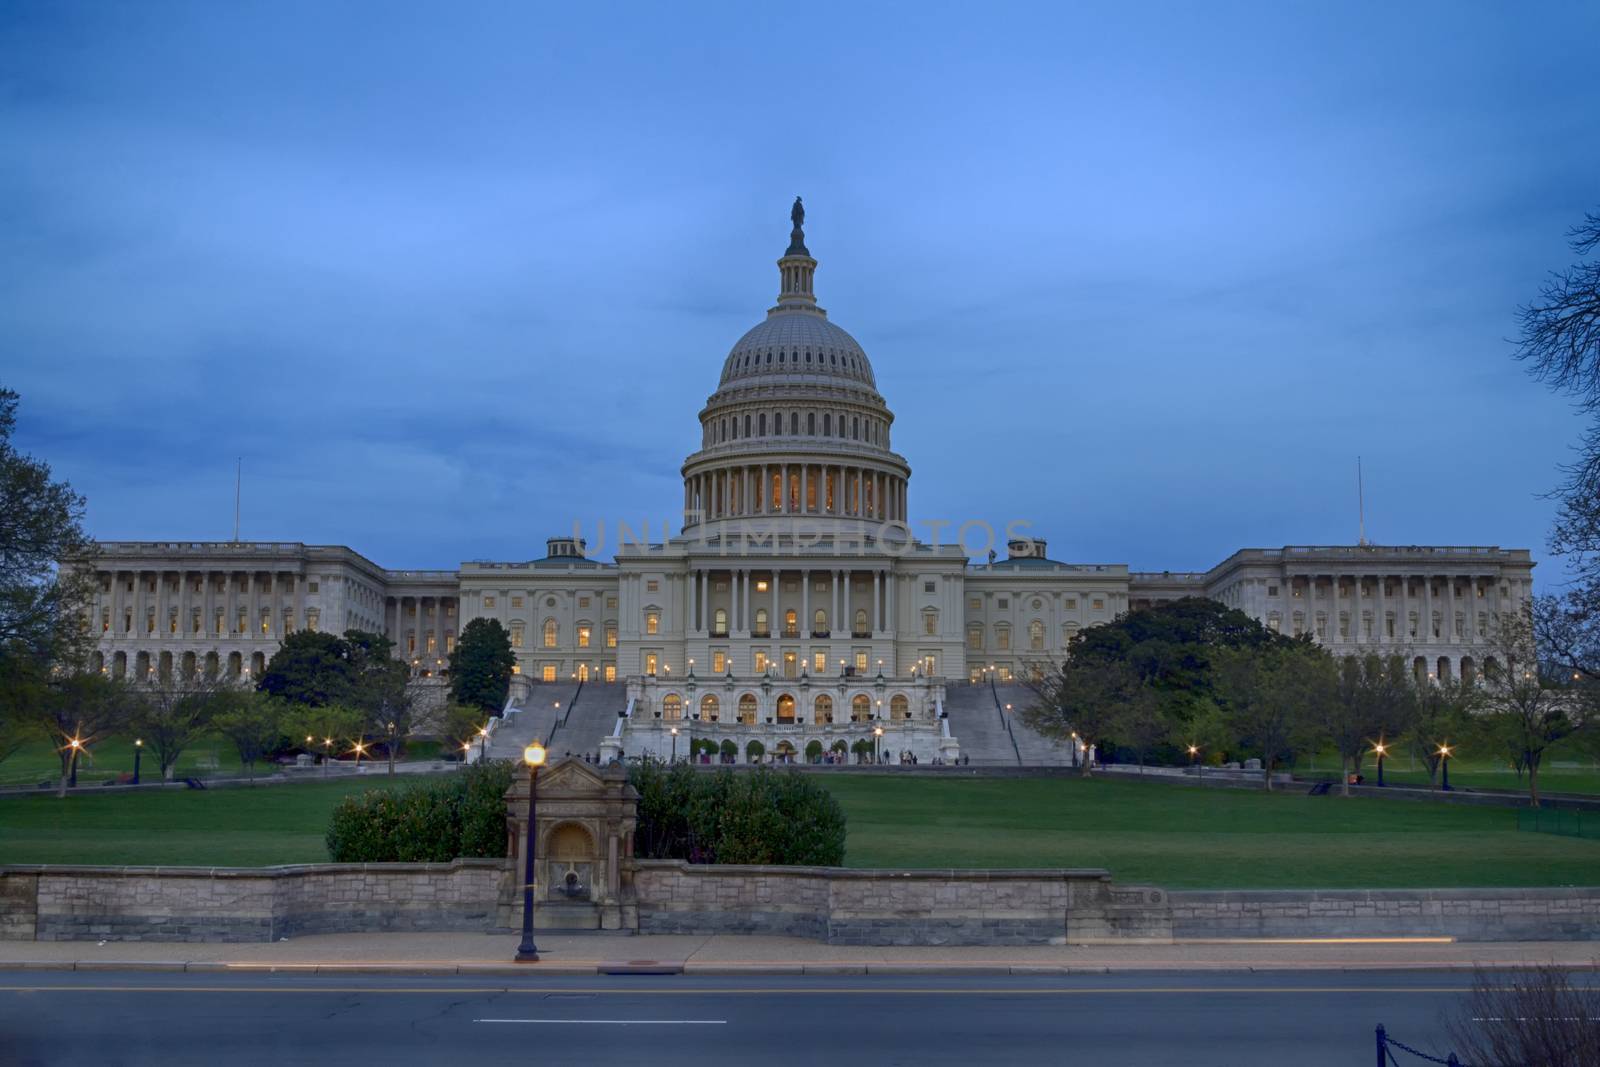 The United States Capitol Building at dusk in Washington D.C.